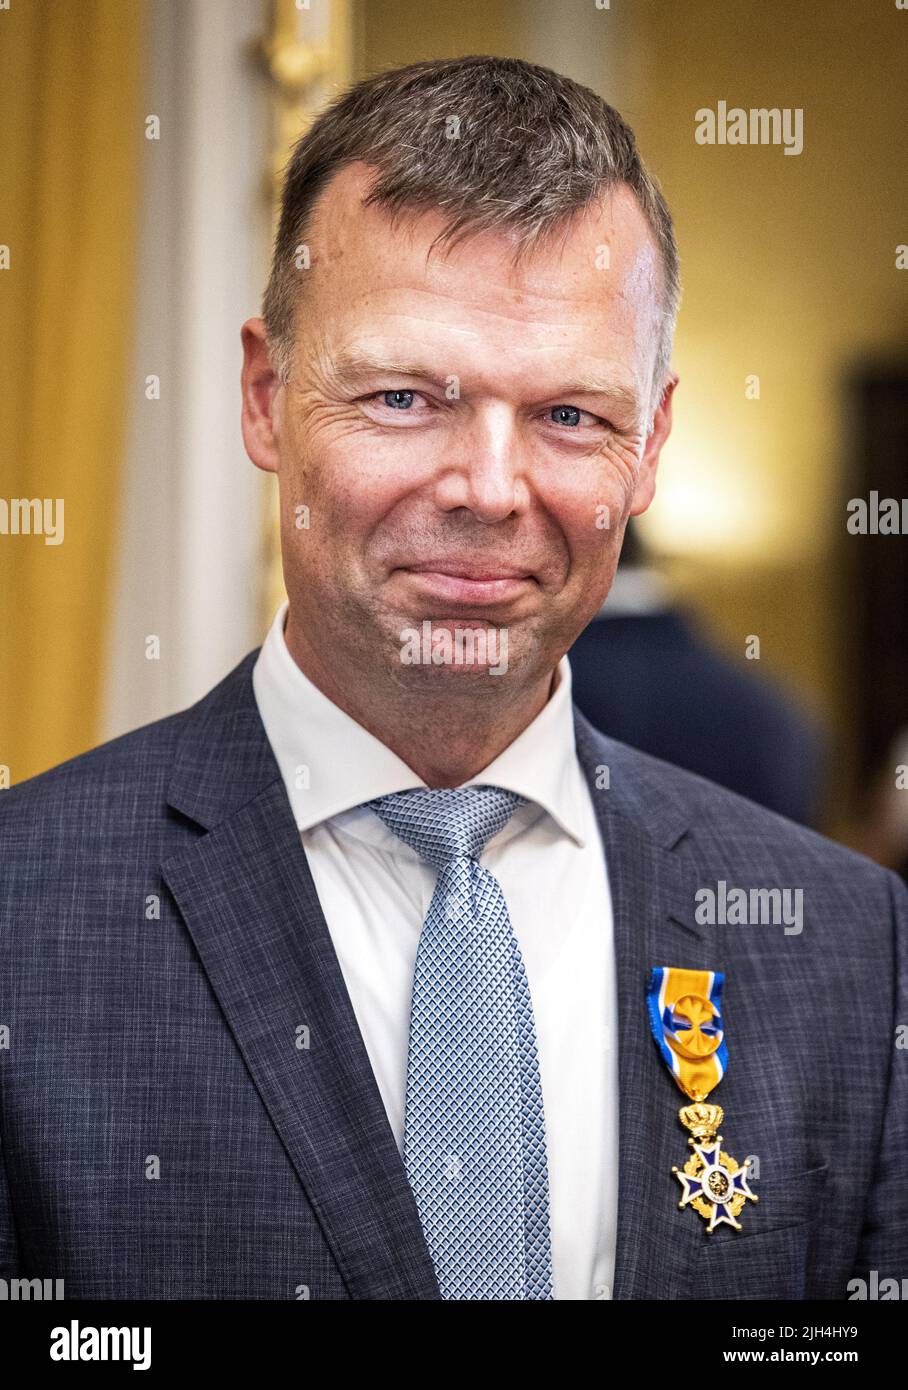 The Hague, Netherlands. 15th July, 2022. 2022-07-15 09:31:52 THE HAGUE - Minister of Foreign Affairs Wopke Hoekstra presents a royal decoration to Alexander Hug for his role in the repatriation of the victims of flight MH17. He was the Deputy Head of the Monitoring Mission in Ukraine on behalf of the Organization for Security and Cooperation in Europe (OSCE) from 2014 to 2018. ANP RAMON VAN FLYMEN netherlands out - belgium out Credit: ANP/Alamy Live News Stock Photo